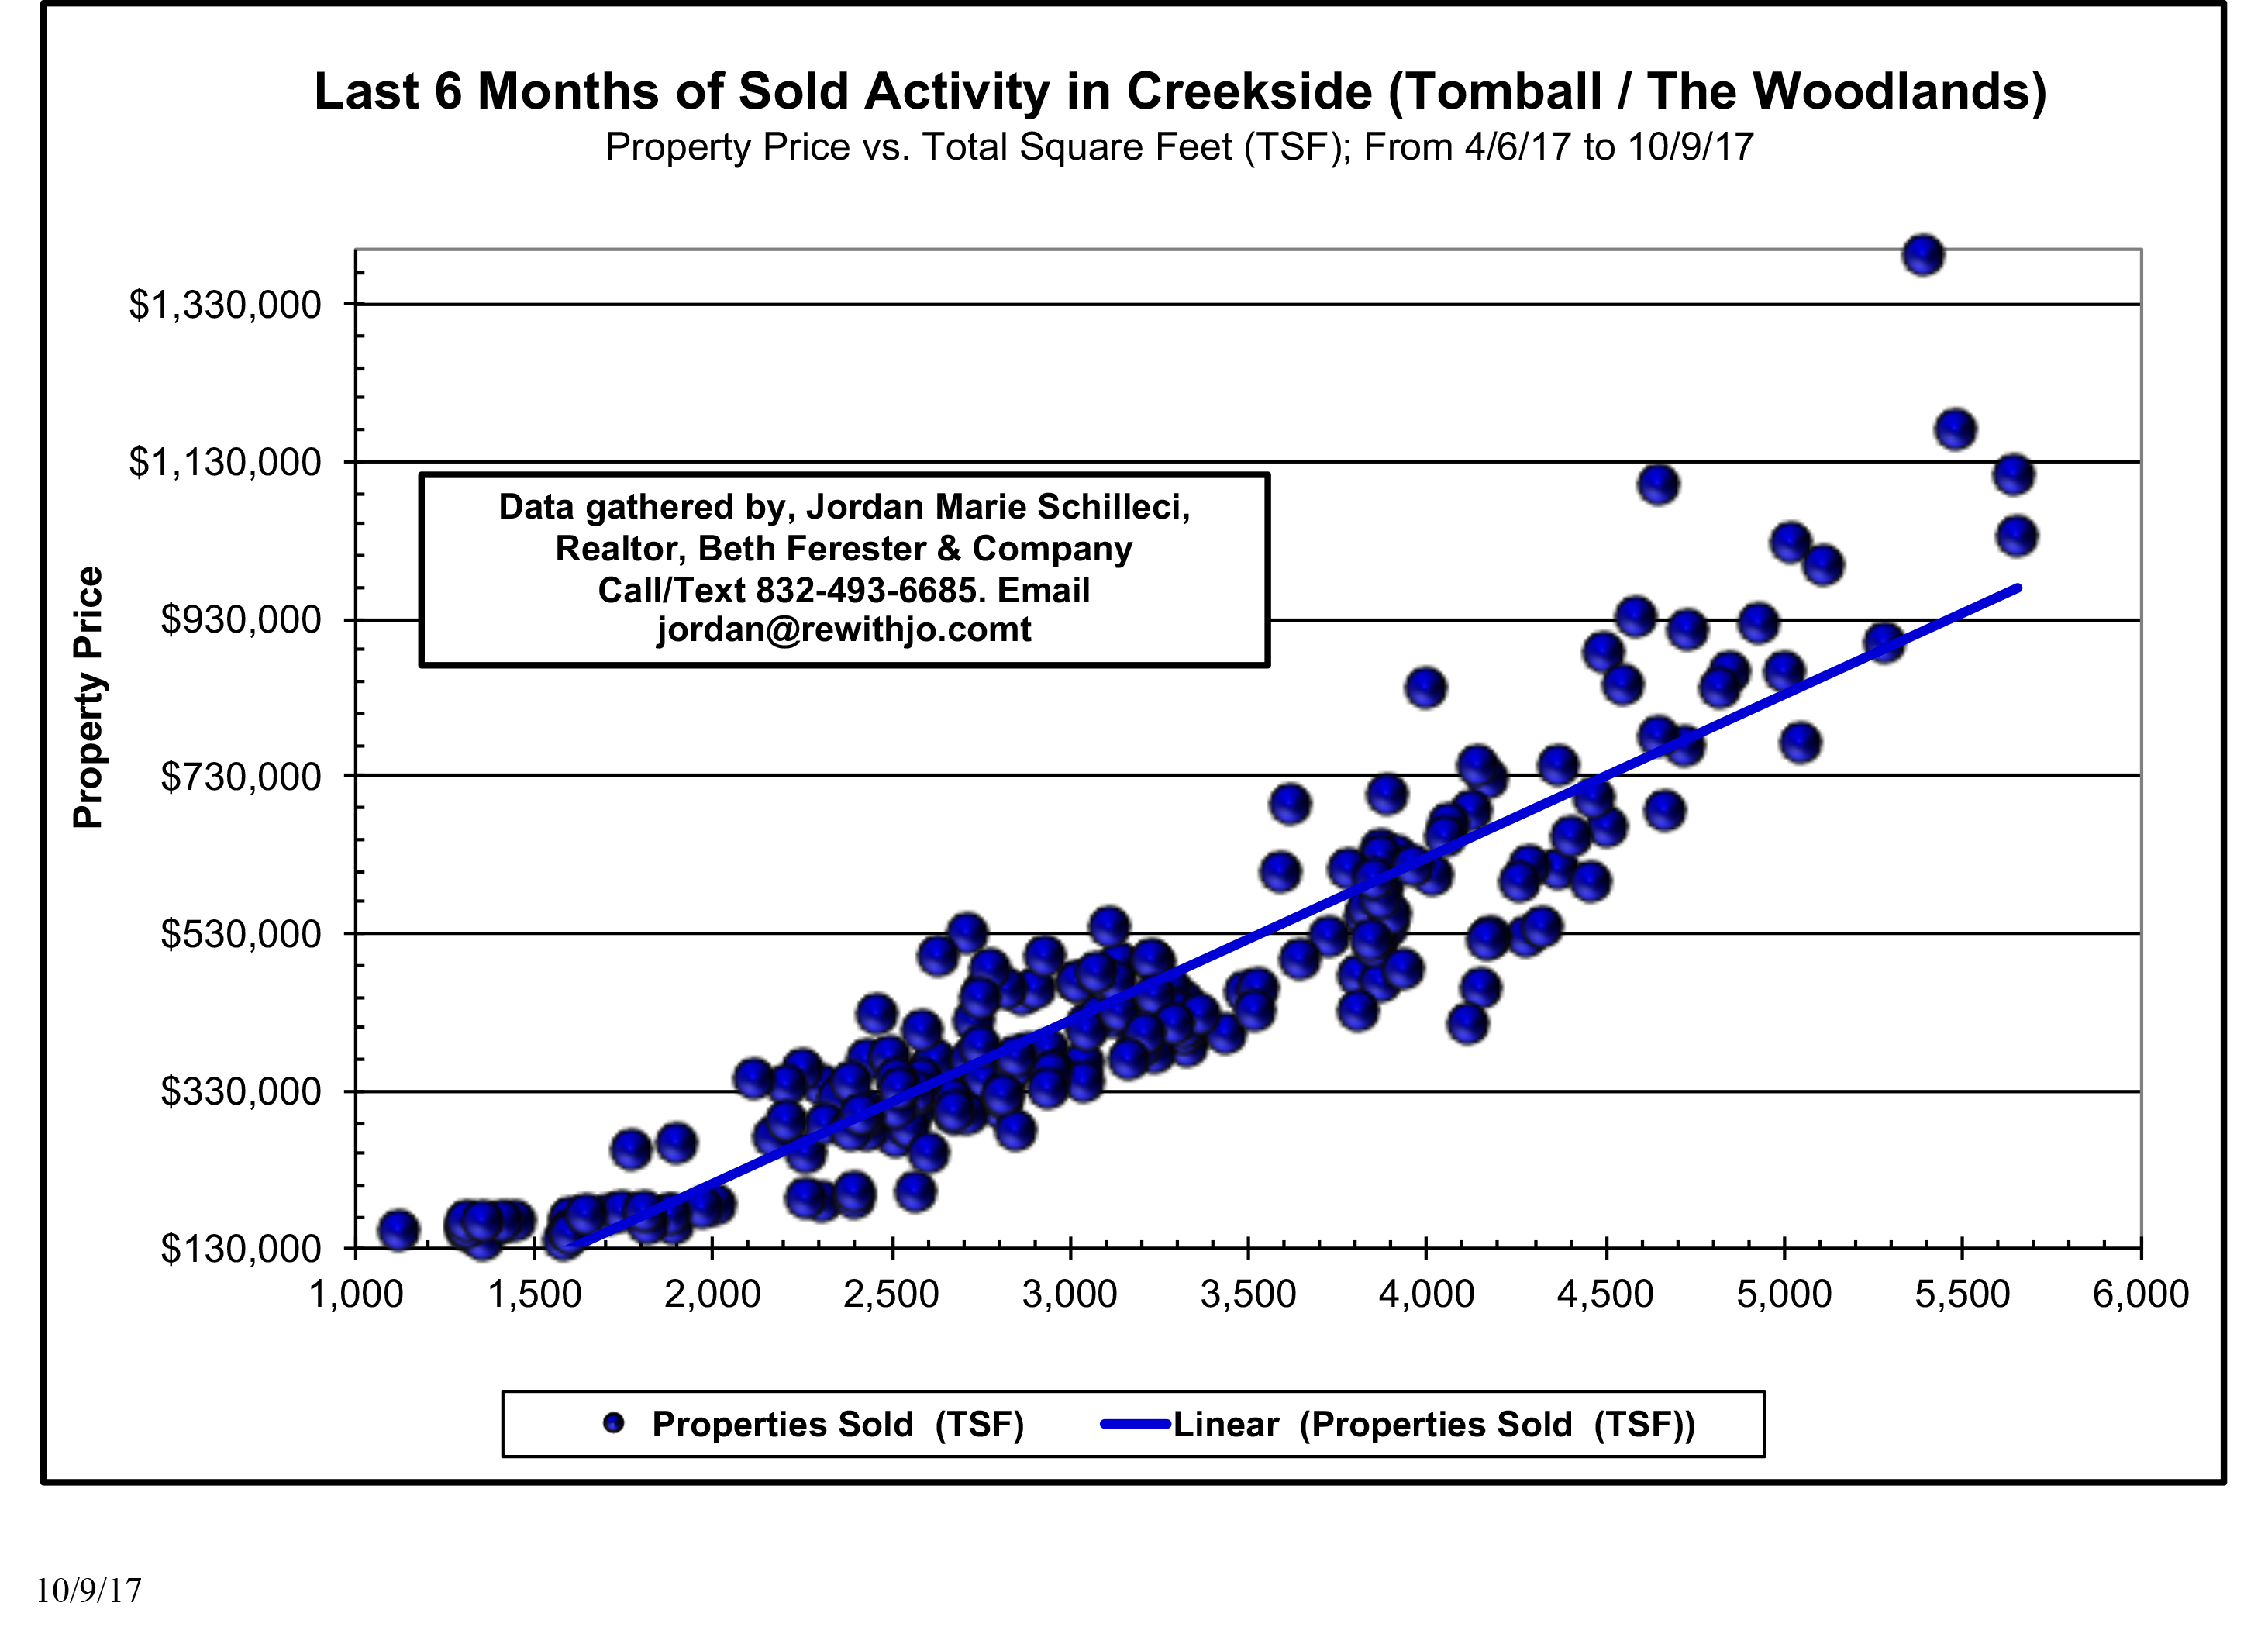 Last 6 Months of Sold Activity in Creekside The Woodlands